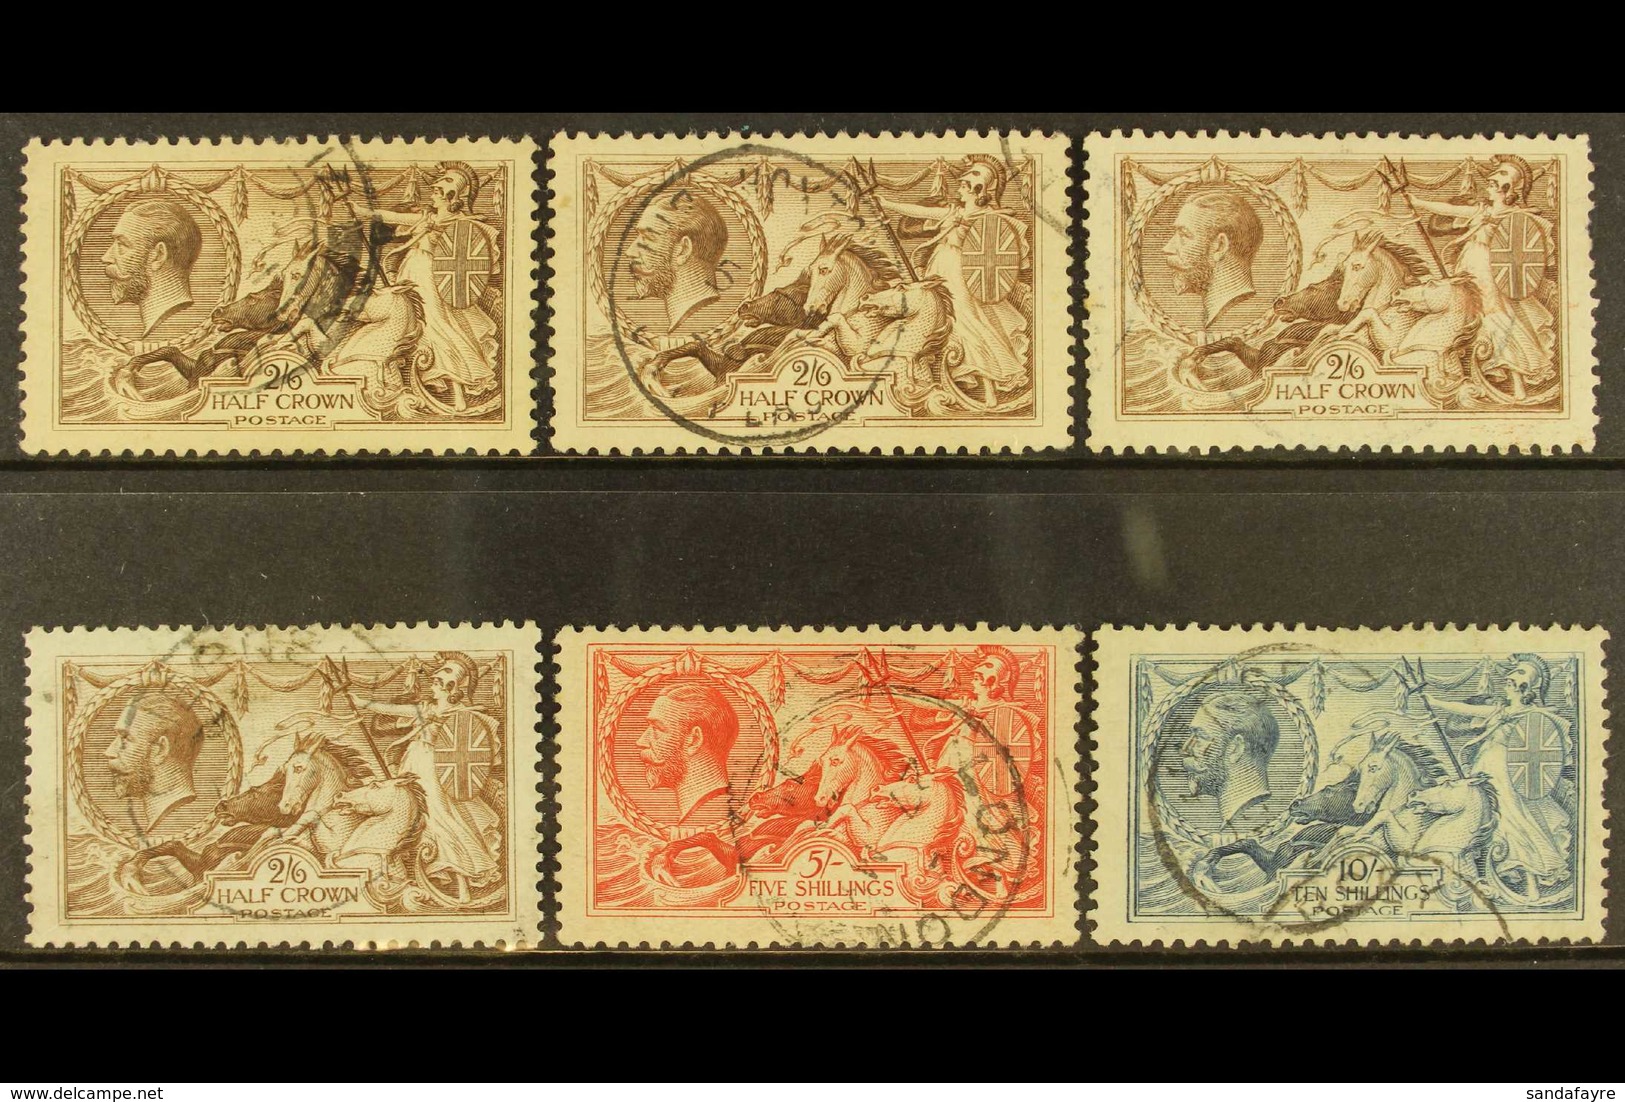 1918-19 Bradbury Seahorses Complete Set Inc Four 2s6d Shades, SG 413a/17, Cds Used, Some With Minor Perforation Imperfec - Unclassified